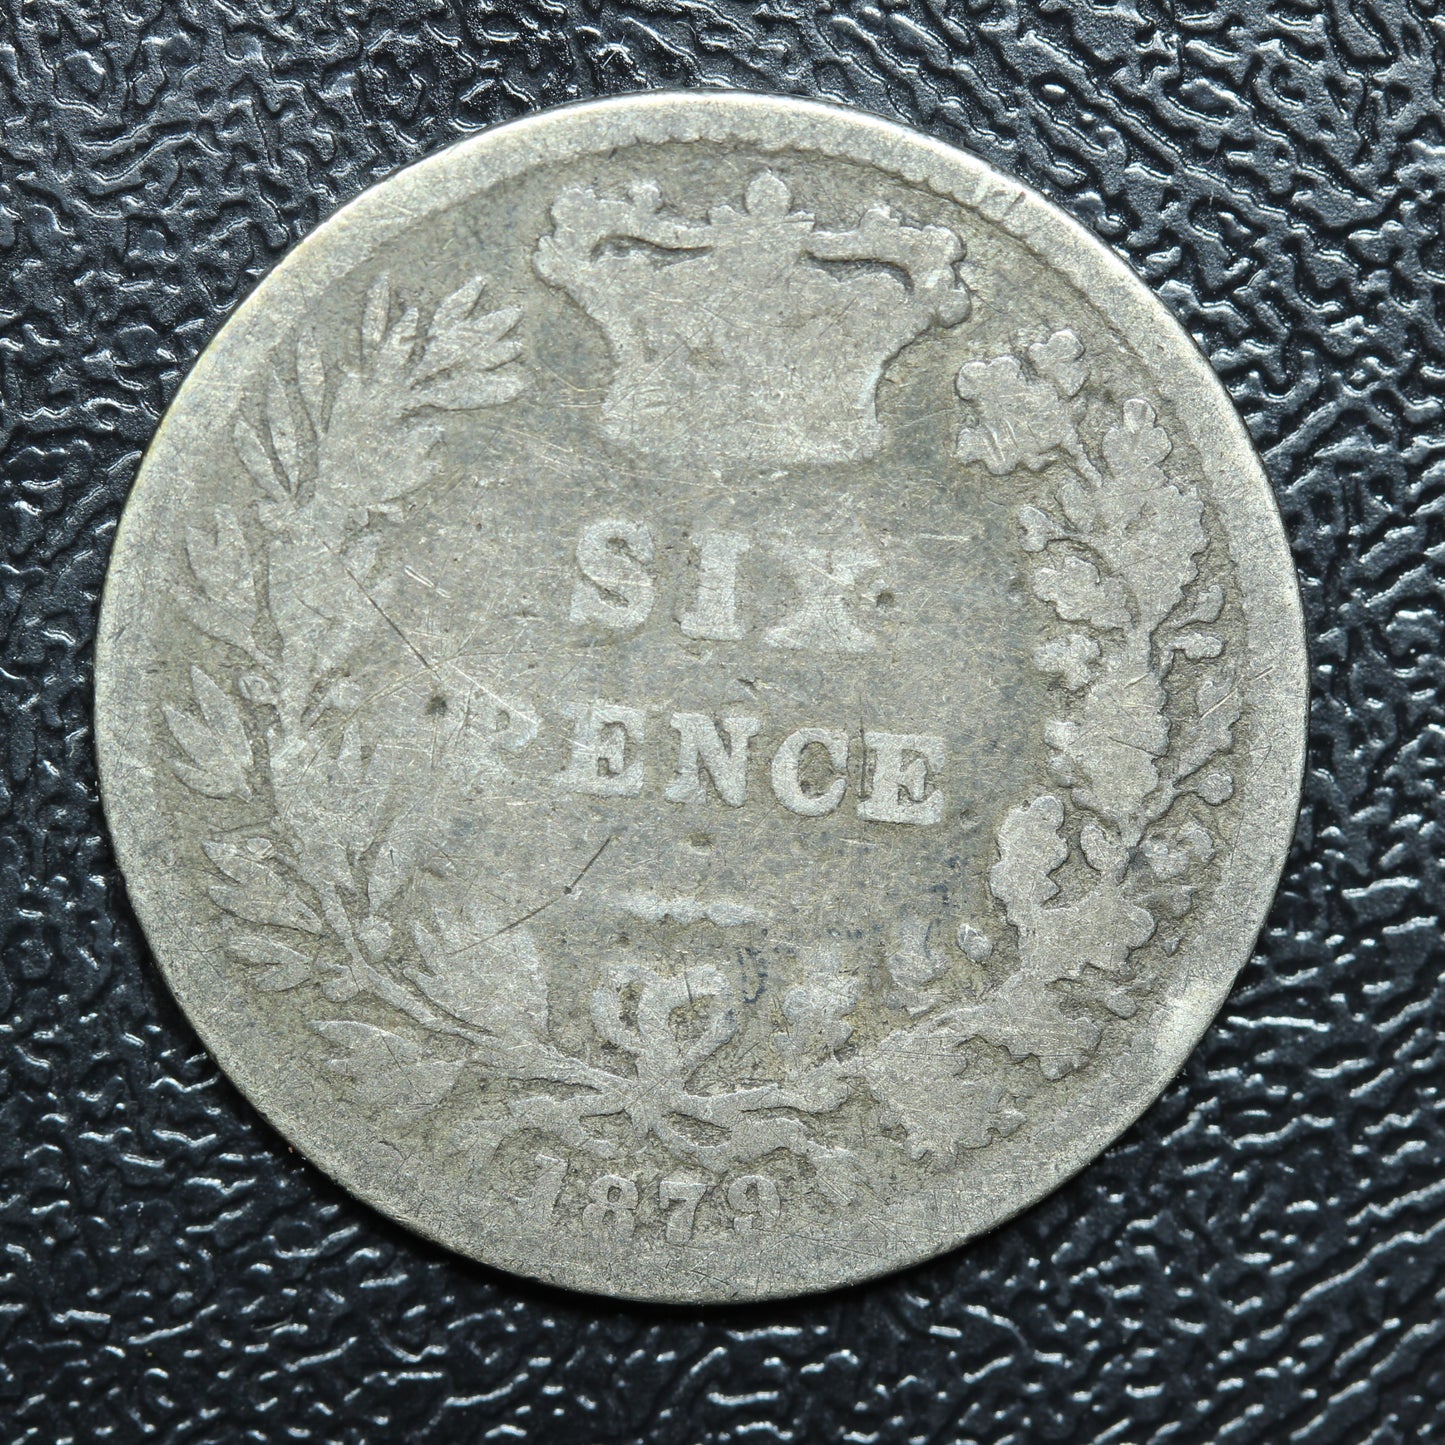 1879 Great Britain 6P Six Pence Silver Coin - KM# 751.2